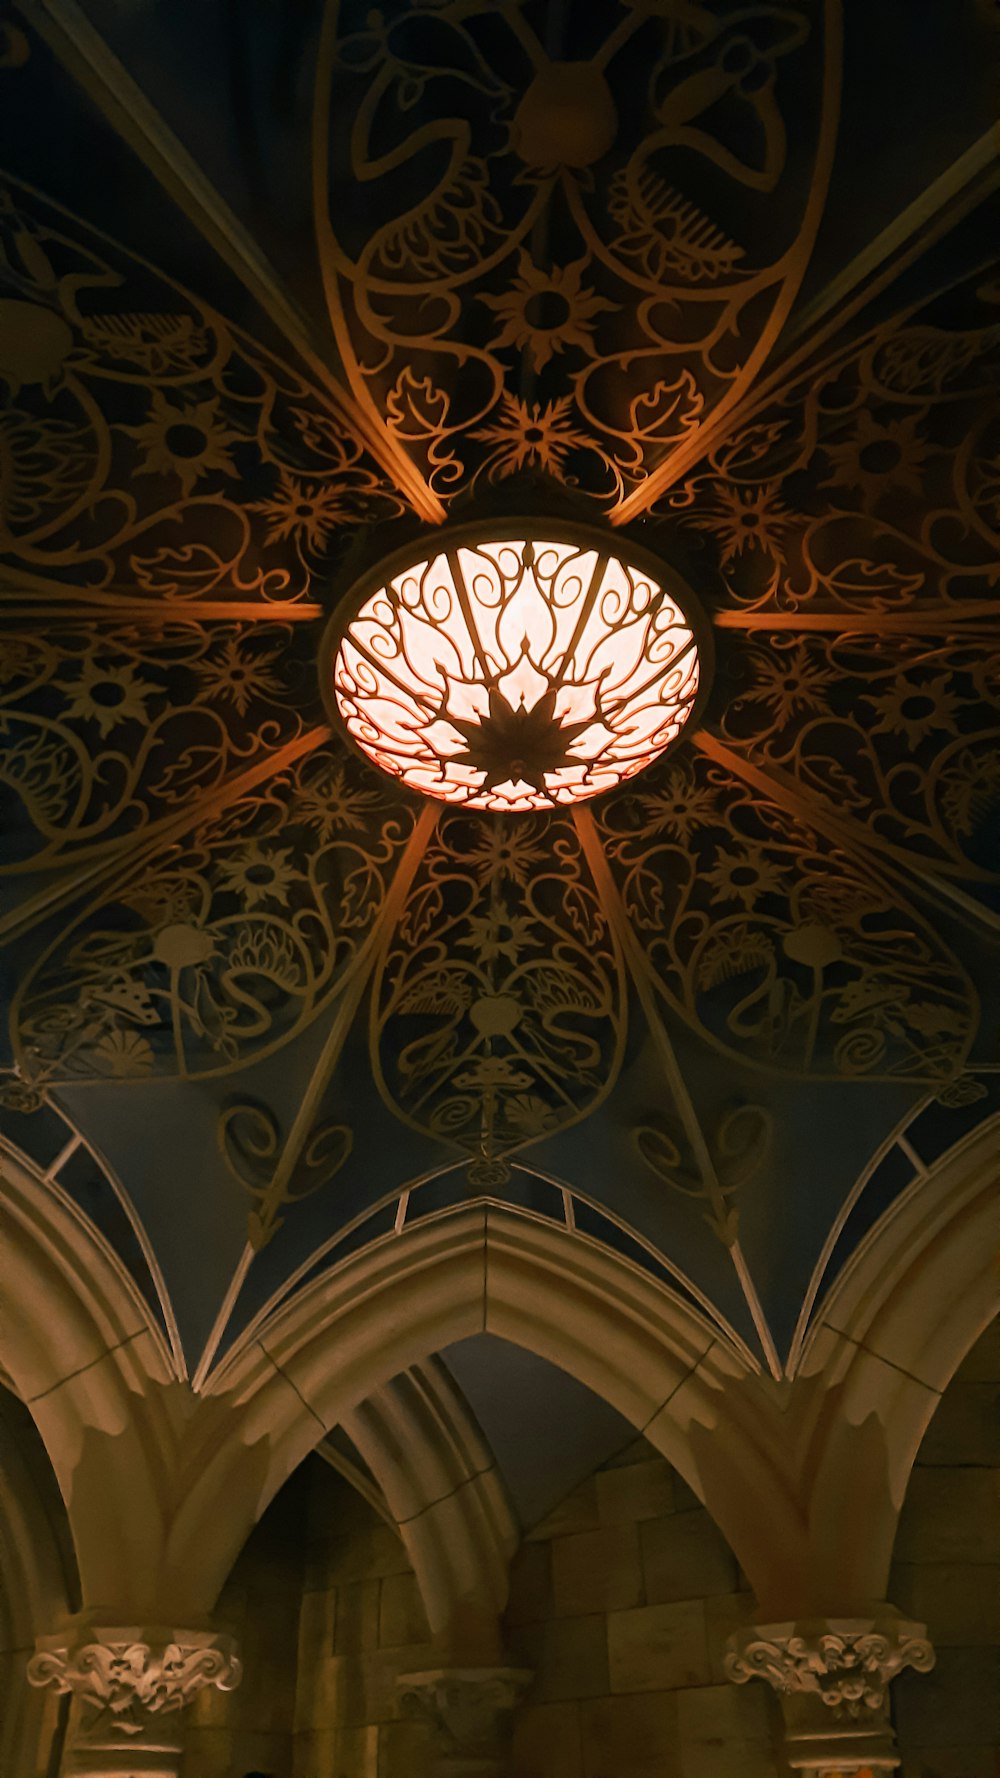 the ceiling of a building with a fancy light fixture